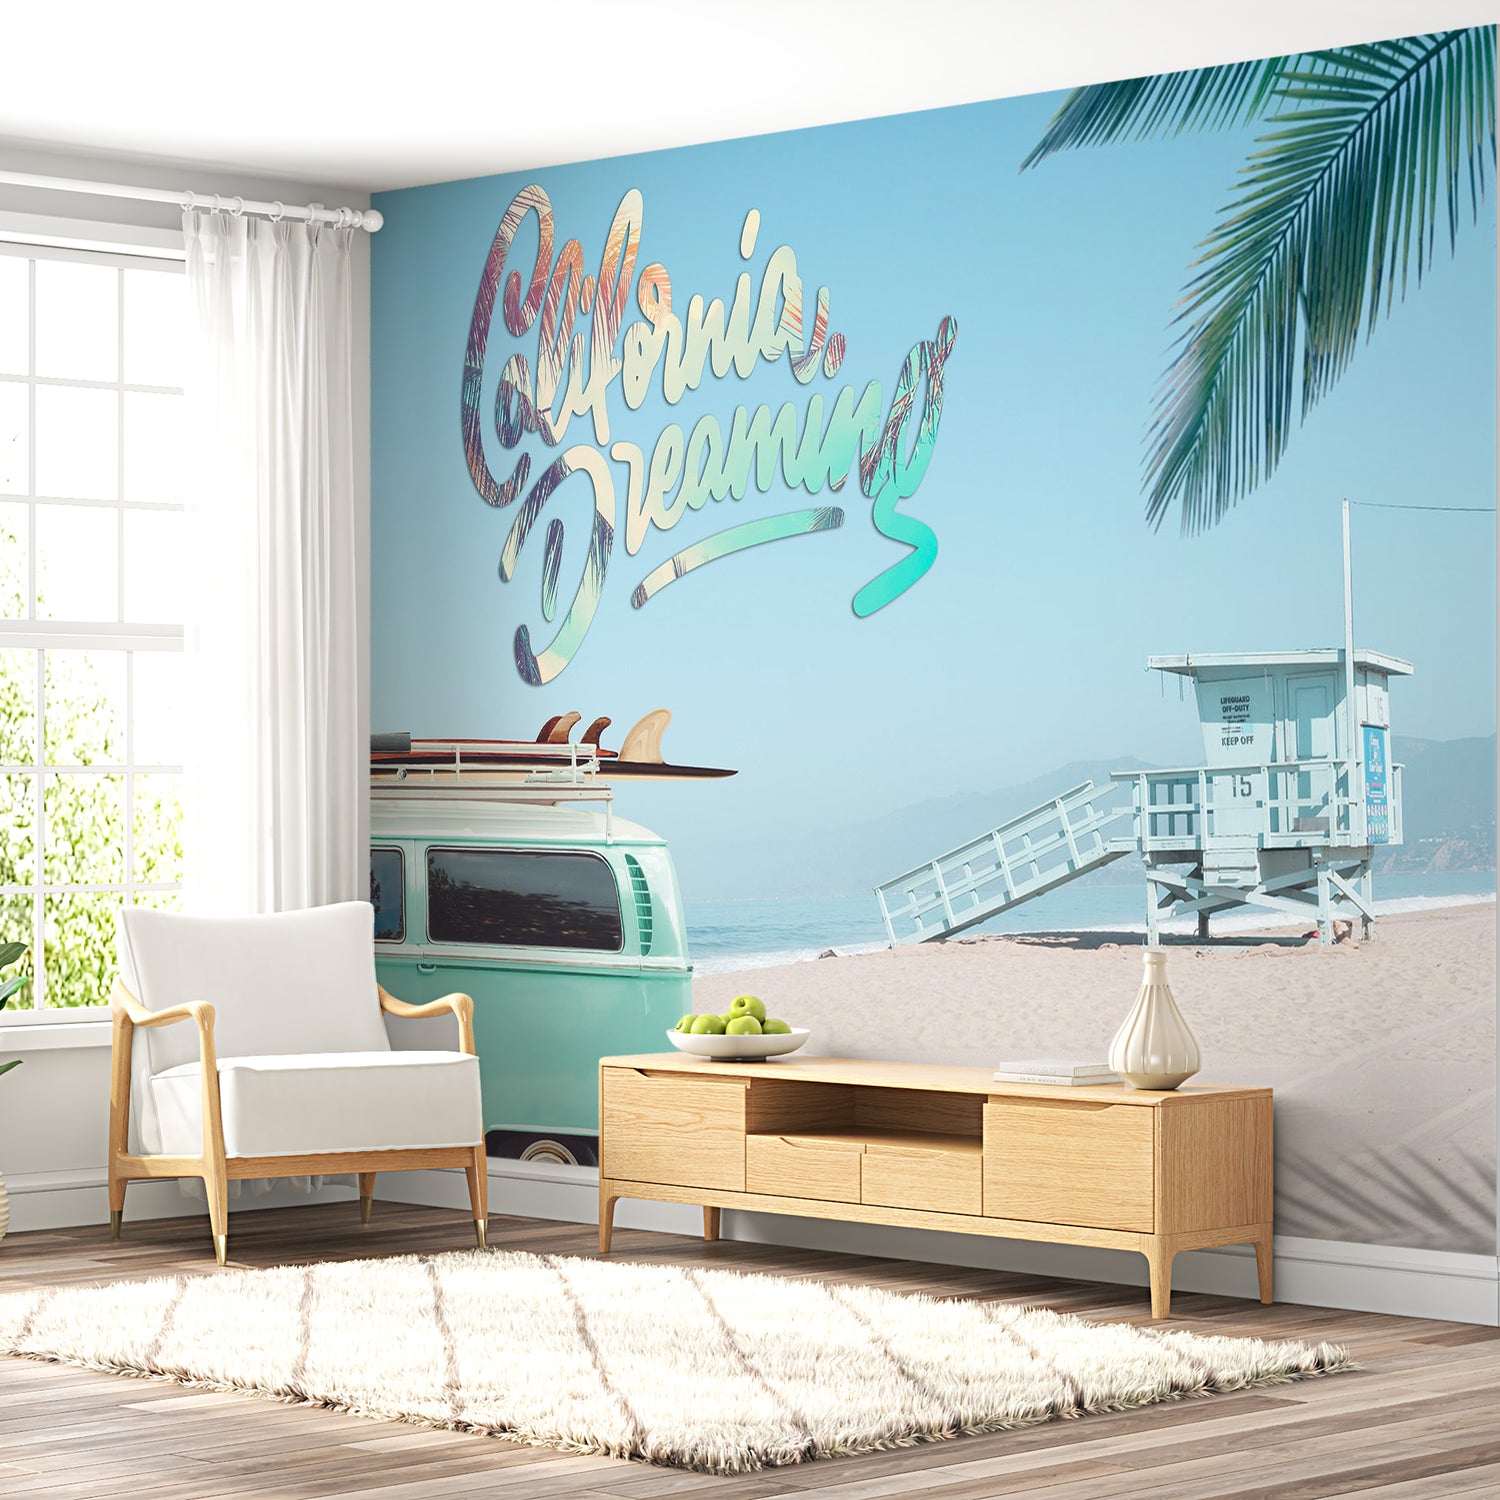 Peel & Stick Surf Wall Mural - California Dreaming - Removable Wall Decals